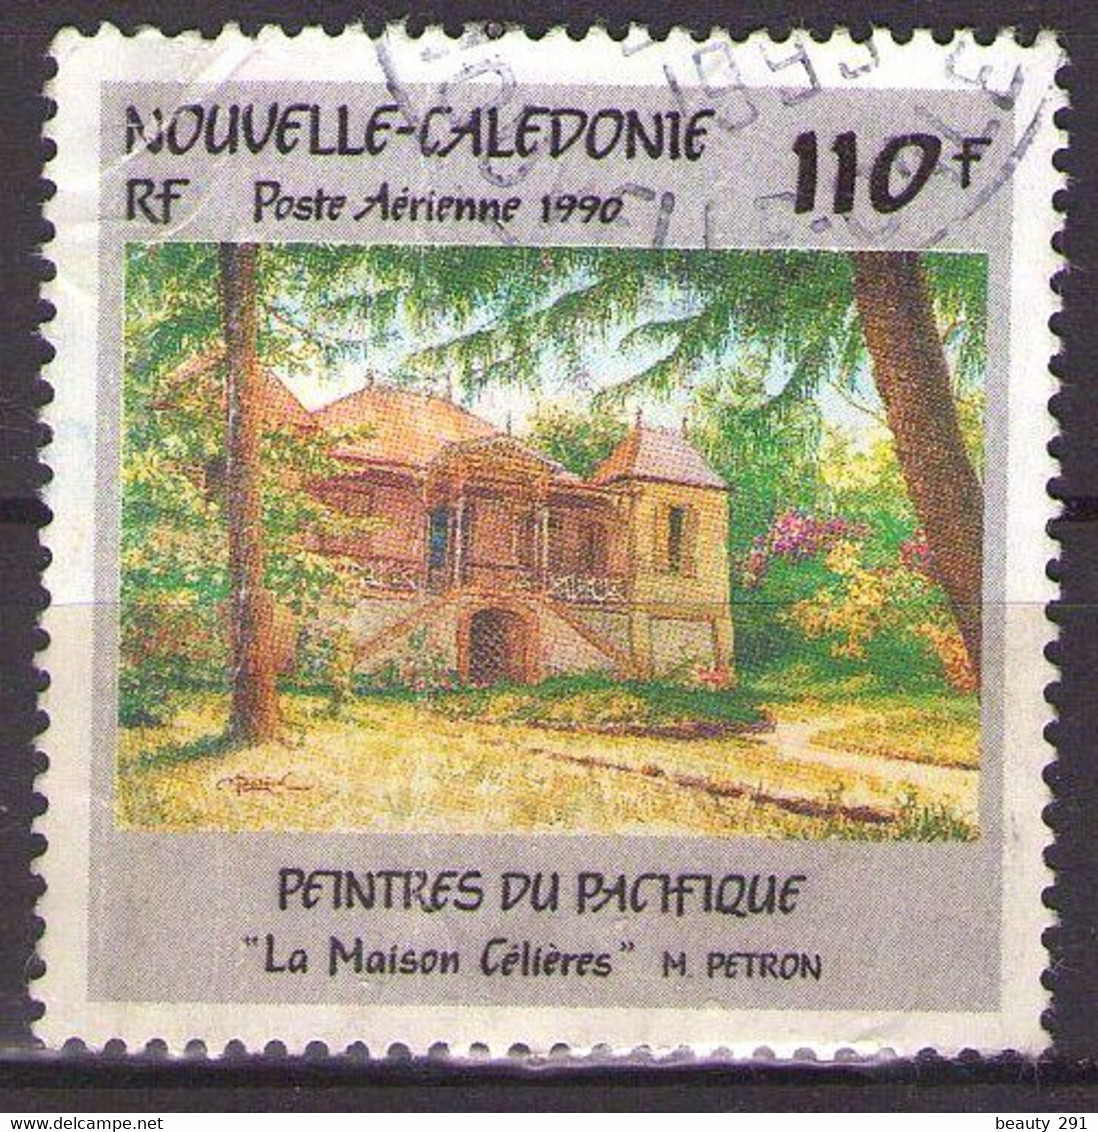 NOUVELLE CALEDONIE - POSTE AERIENNE  1990  Mi 891  USED - Used Stamps